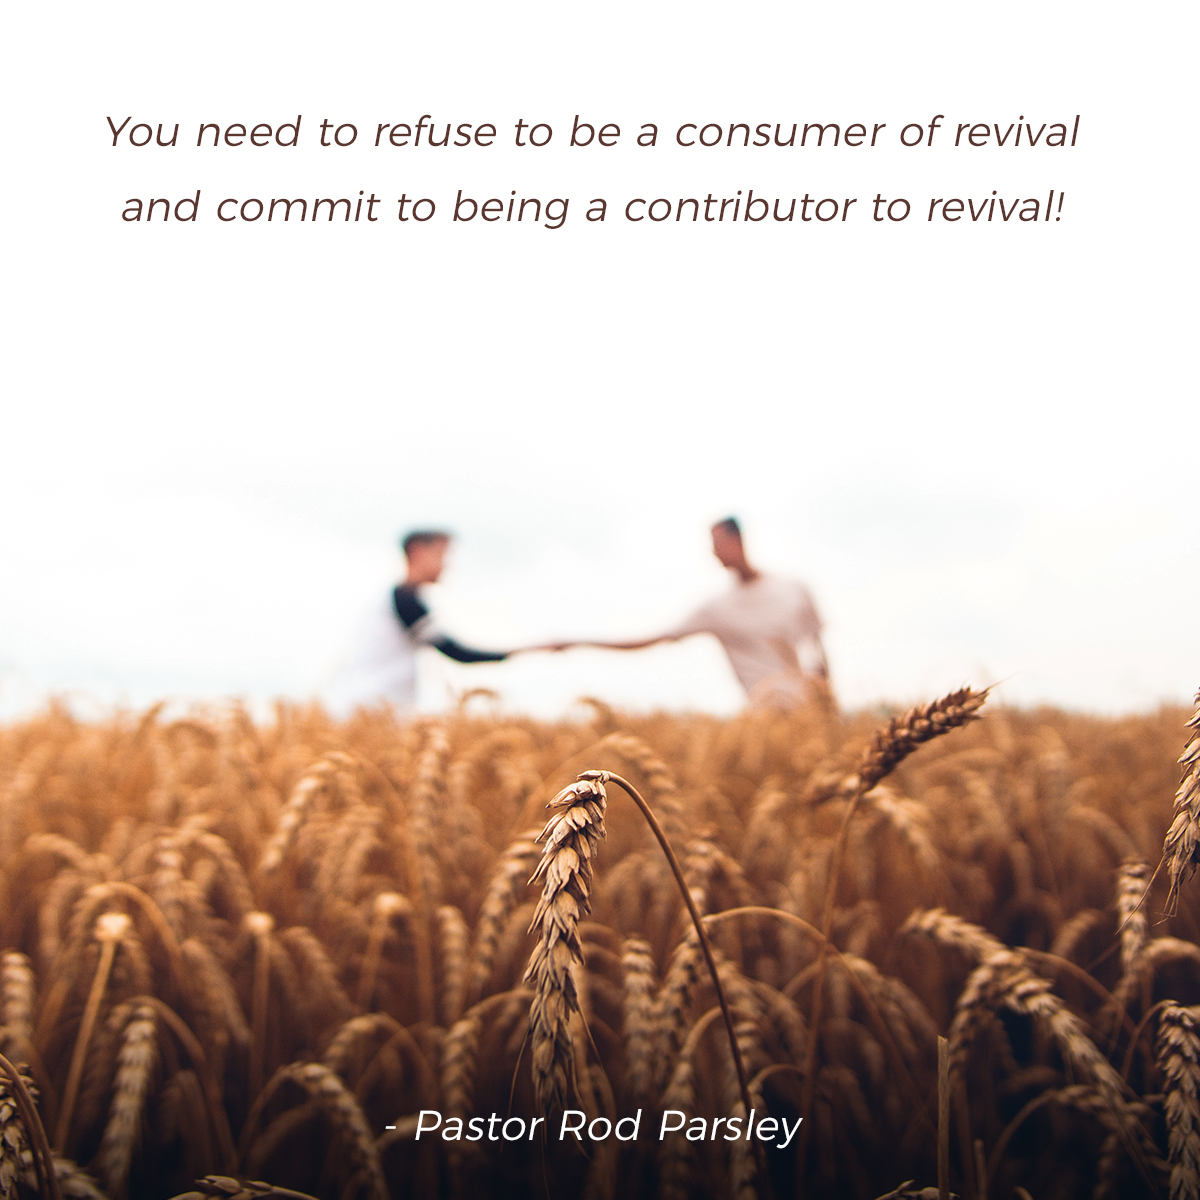 “You need to refuse to be a consumer of revival and commit to being a contributor to revival!” – Pastor Rod Parsley